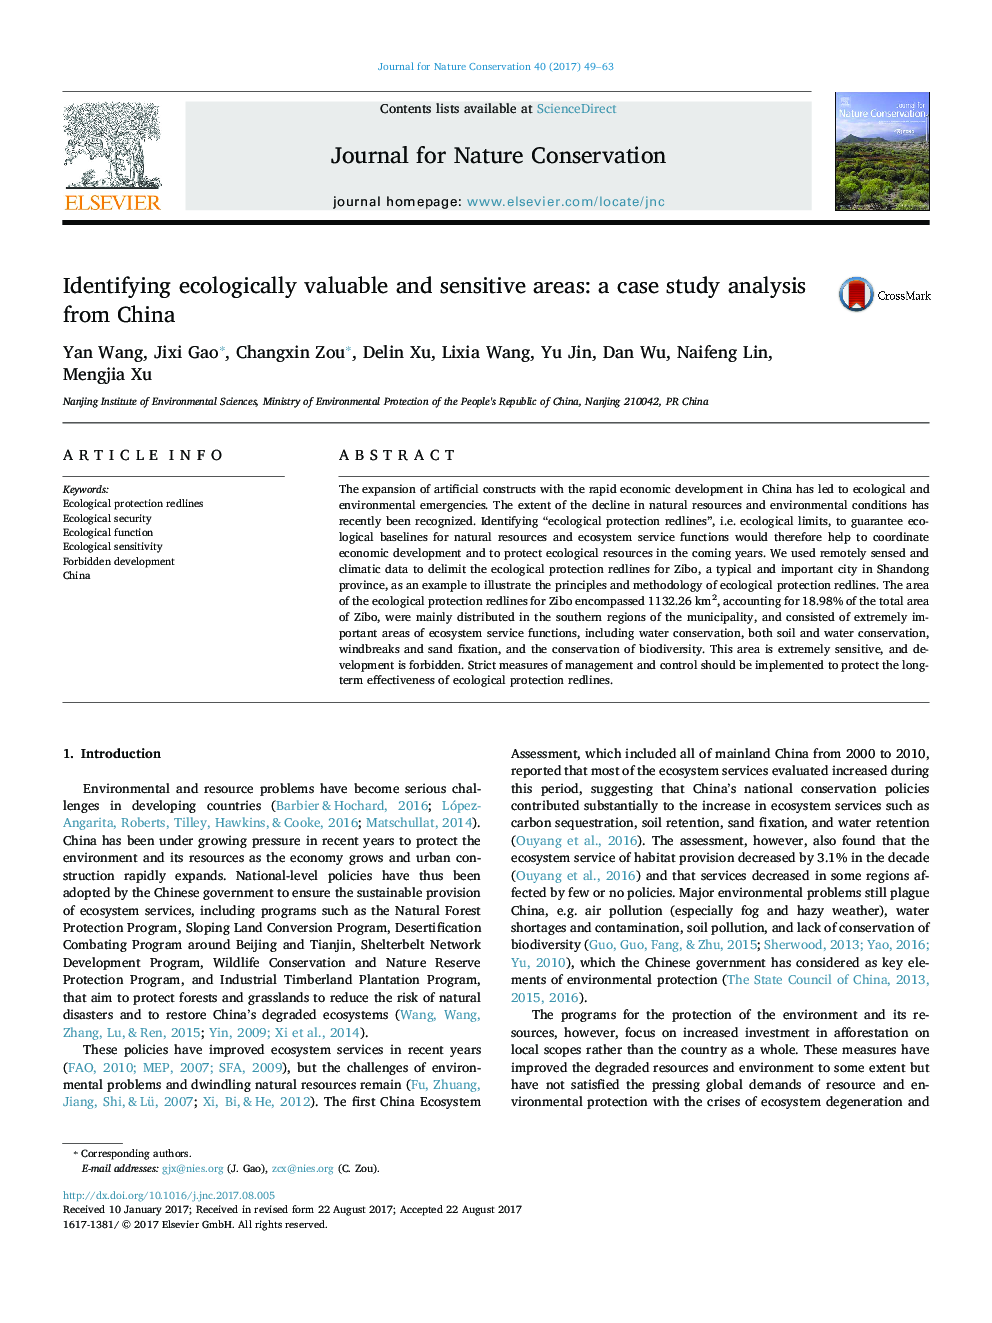 Identifying ecologically valuable and sensitive areas: a case study analysis from China